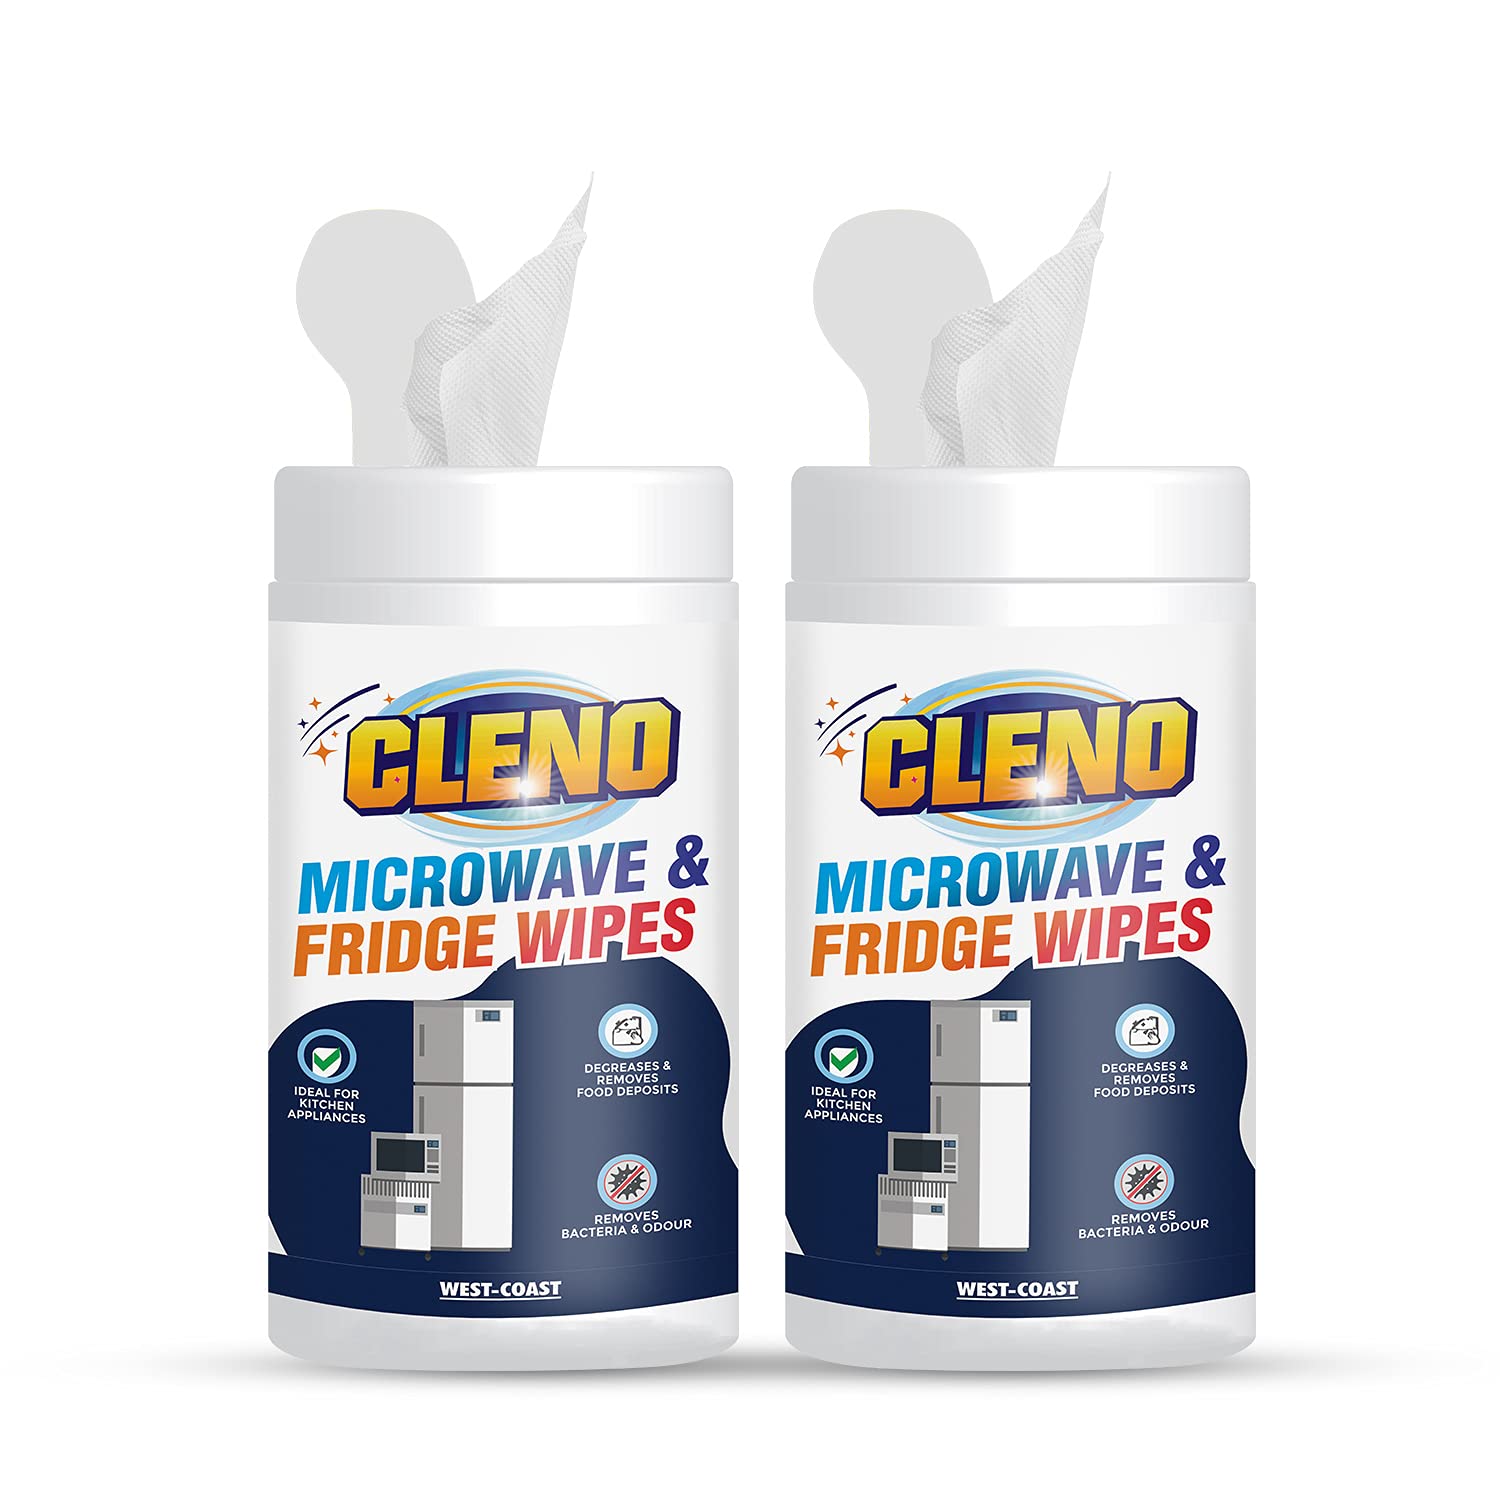 Cleno Microwave & Fridge Wet Wipes Removes Food & Grime Buildup, Quick Spot Cleaning for Microwave/Fridge/Shelves/Cooktops/Chrome/Electric Induction & Toaster - 50 Wipes (Pack of 2) (Ready to Use)